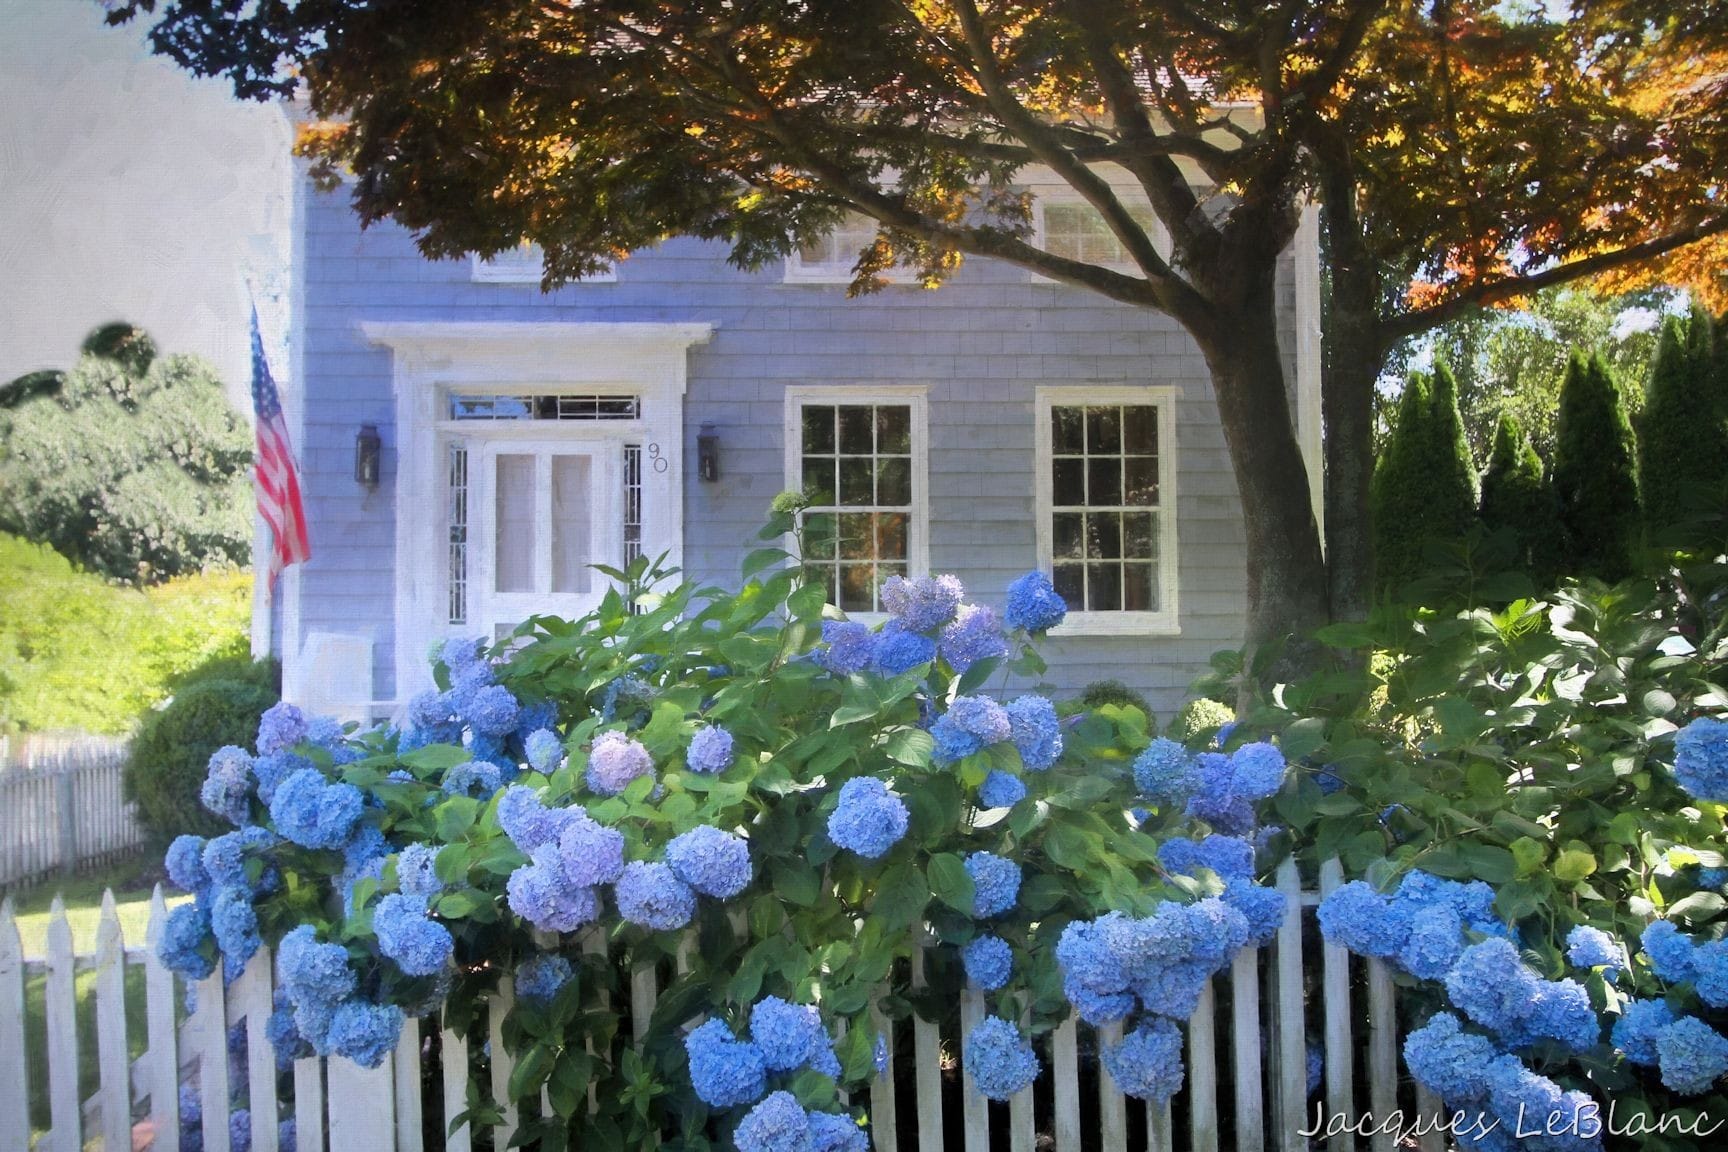 Blue Hydrandea's hug the picket fence in front of this charming small home in the historic district of Sag Harbor in New York.